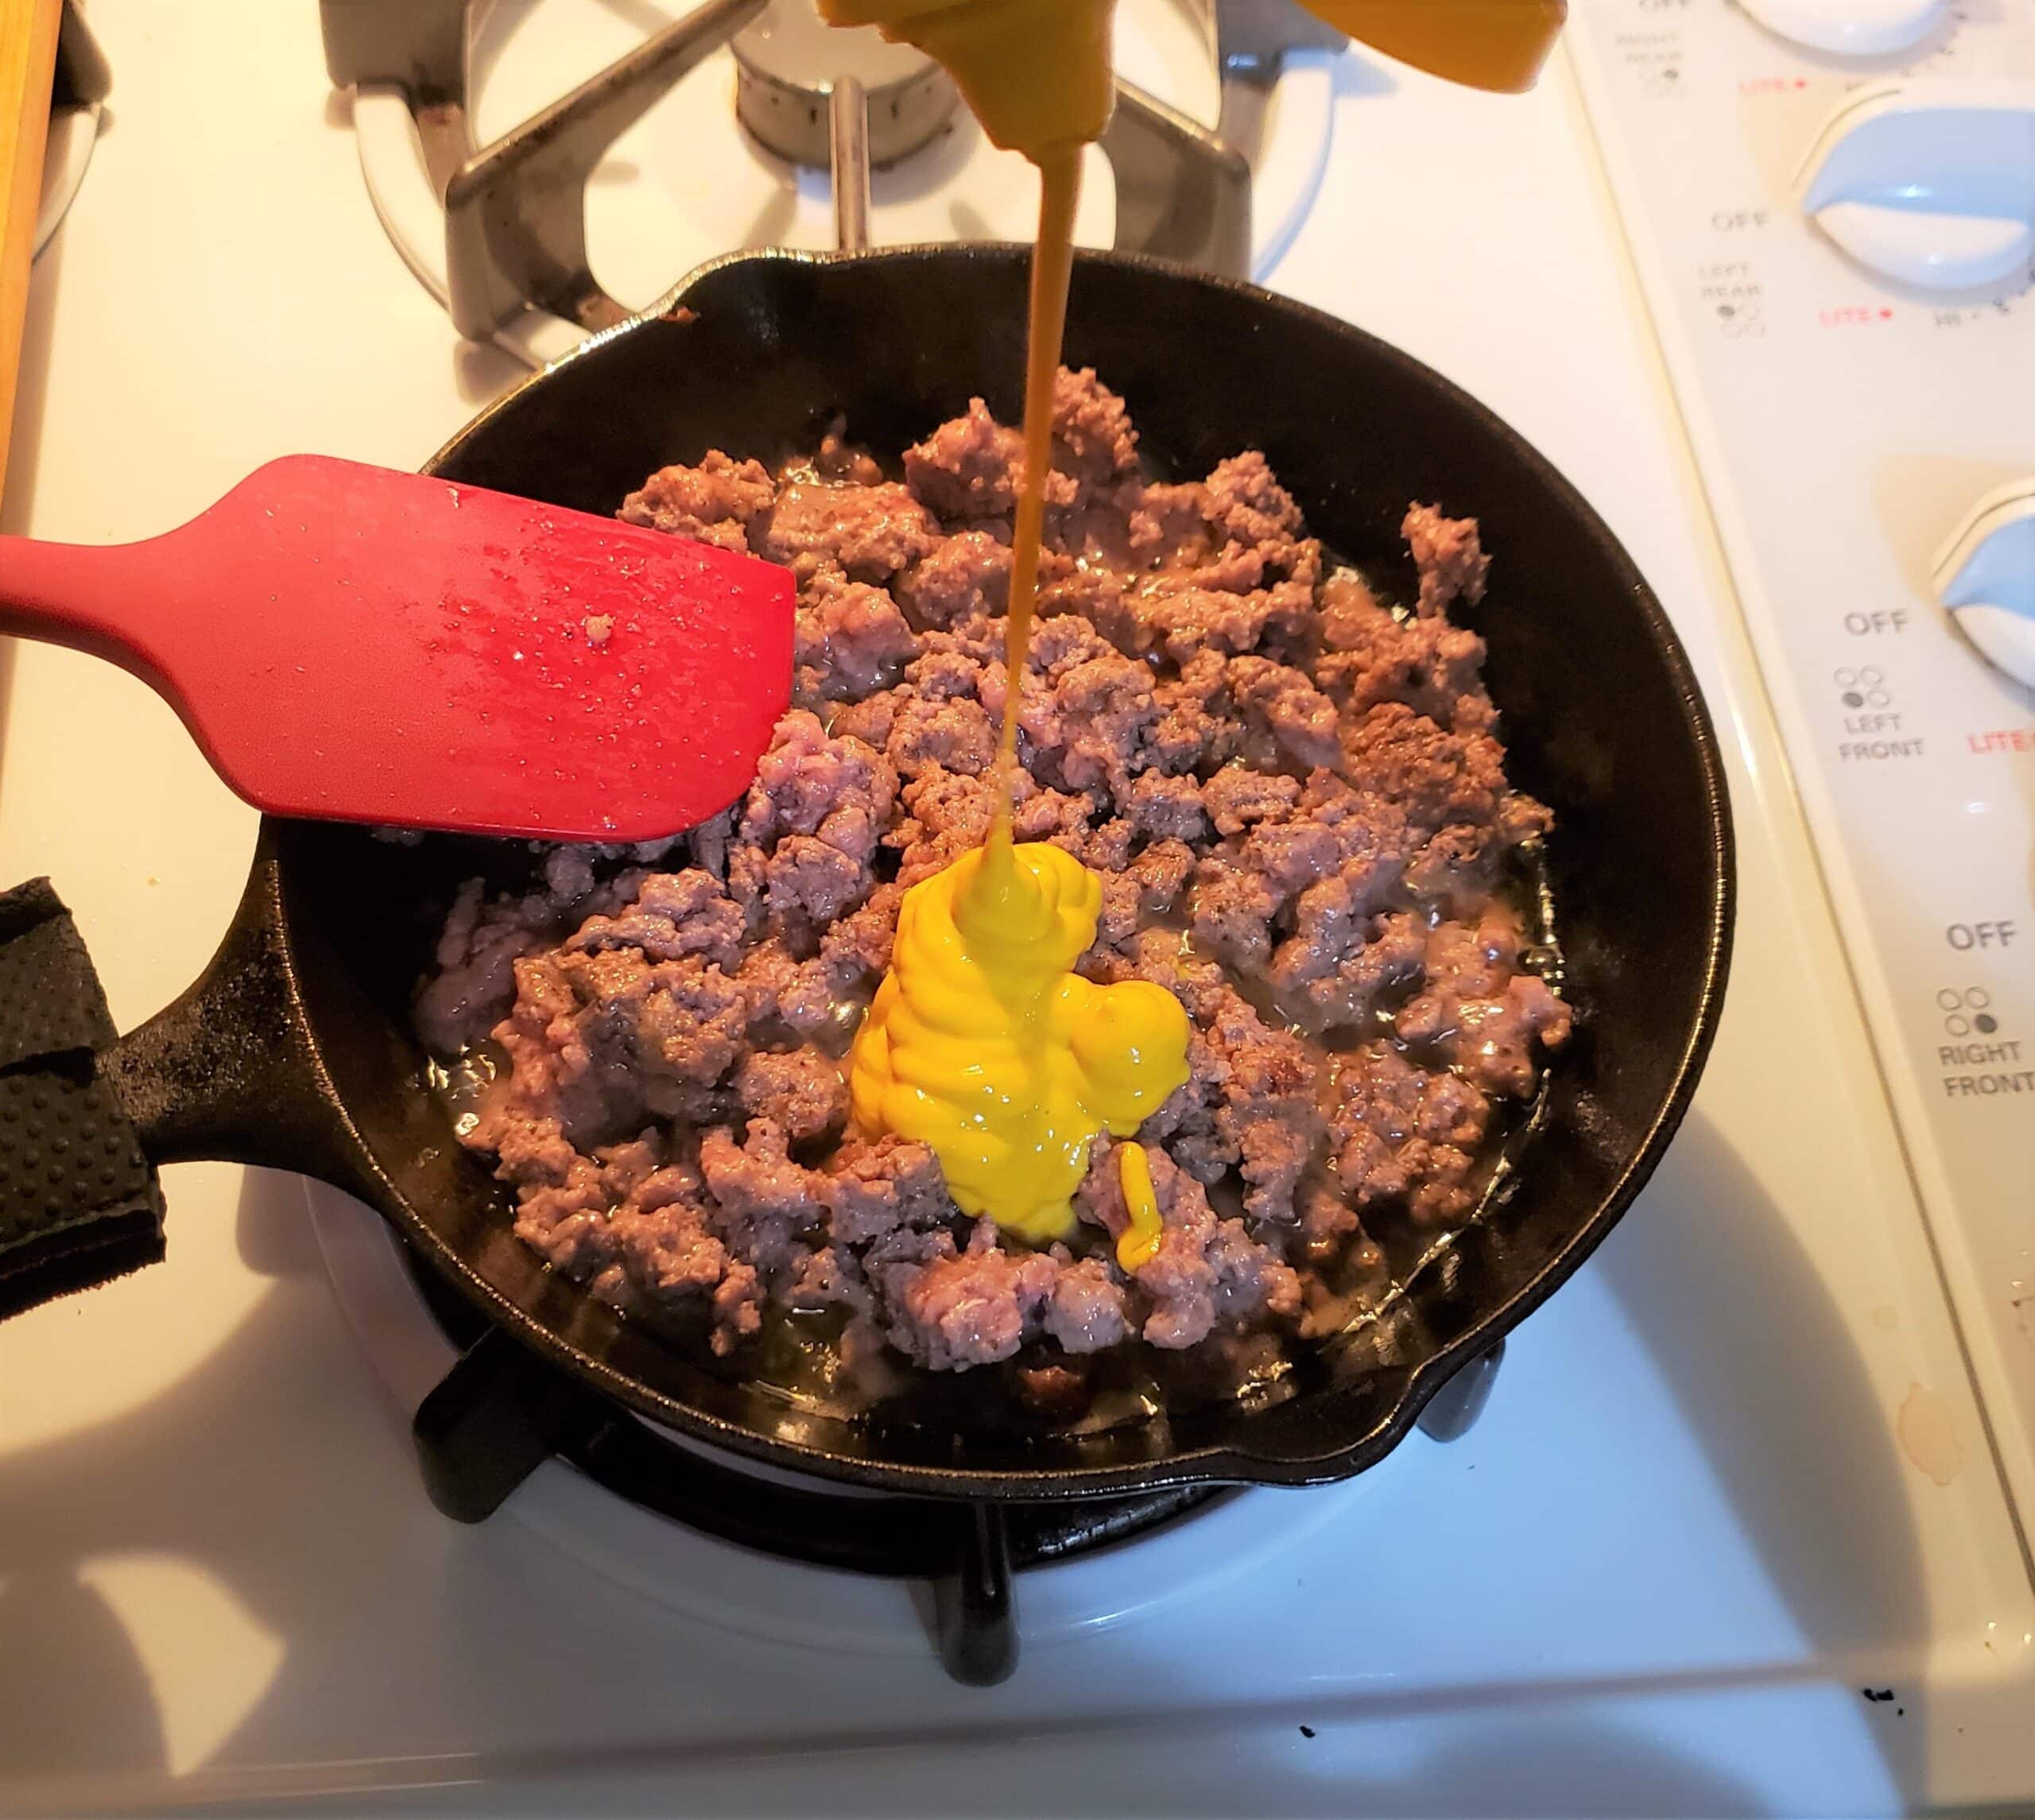 Yellow mustard being squirt into a cast ion pan filled with ground beef